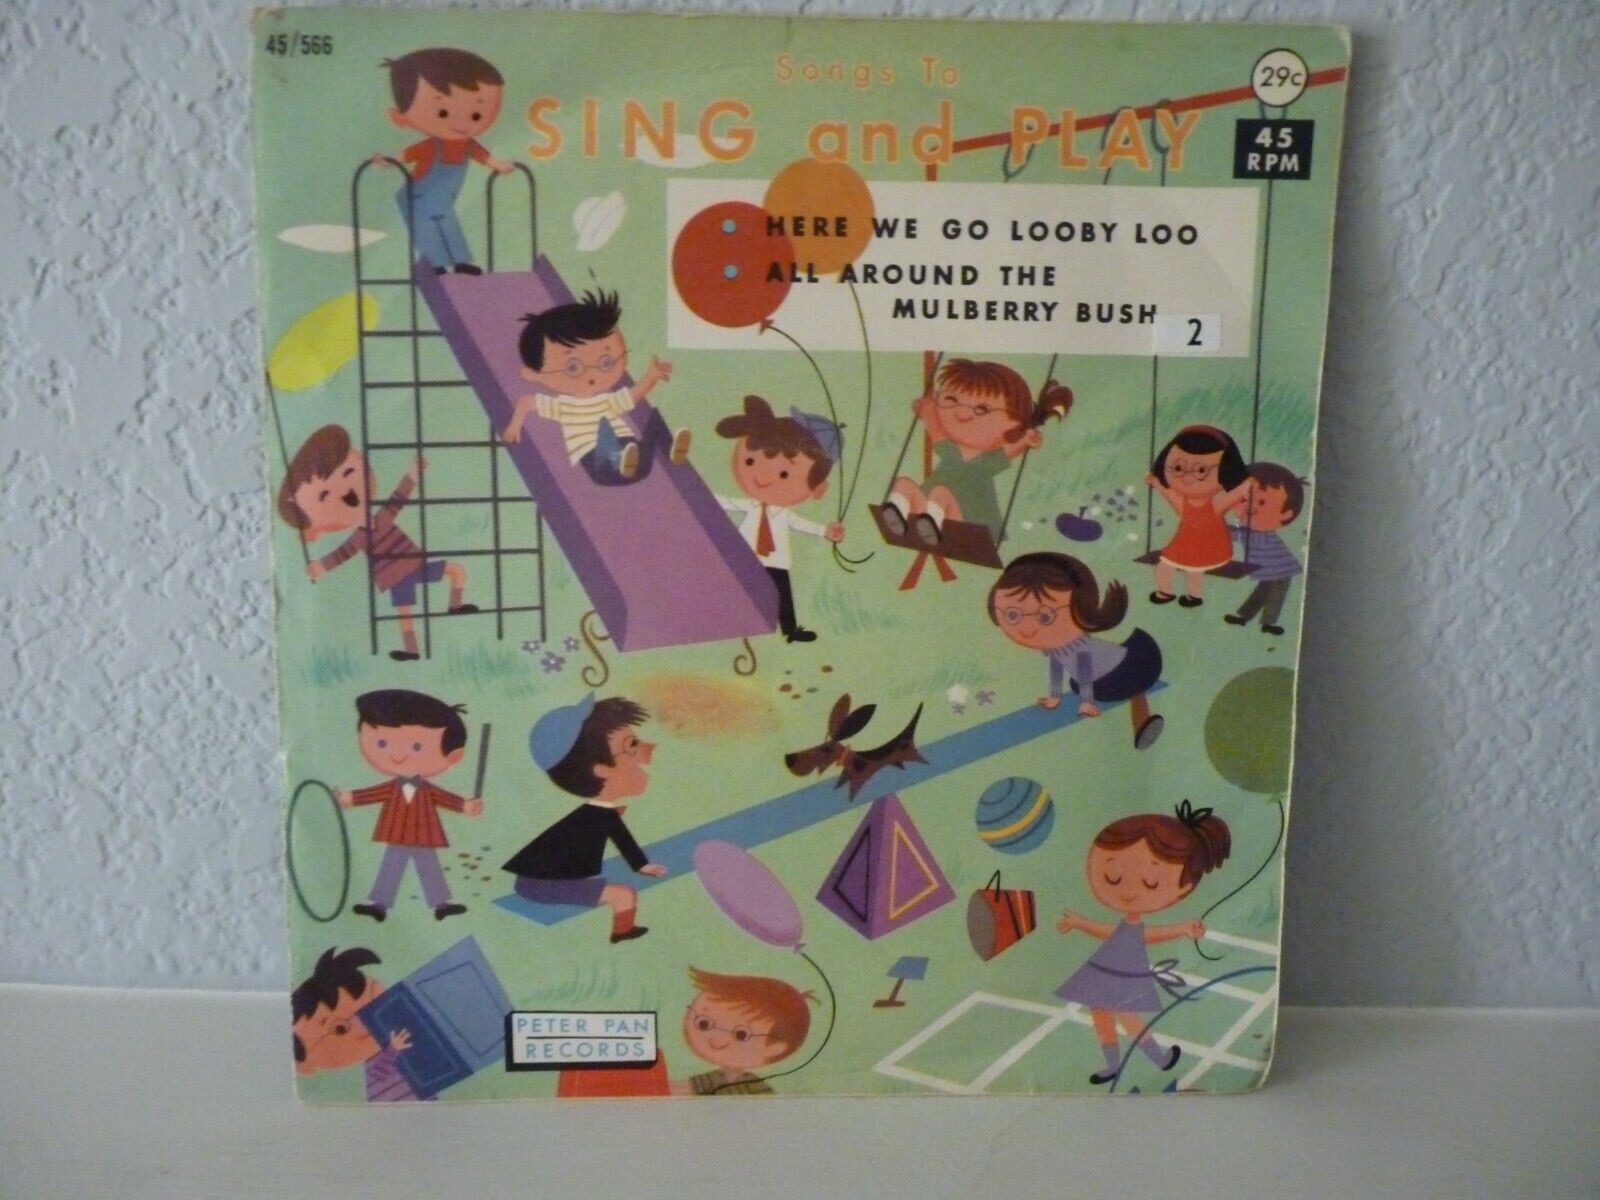 Vintage 1962 Peter Pan Record #566 SONGS TO SING AND PLAY 45RPM - Two Songs 